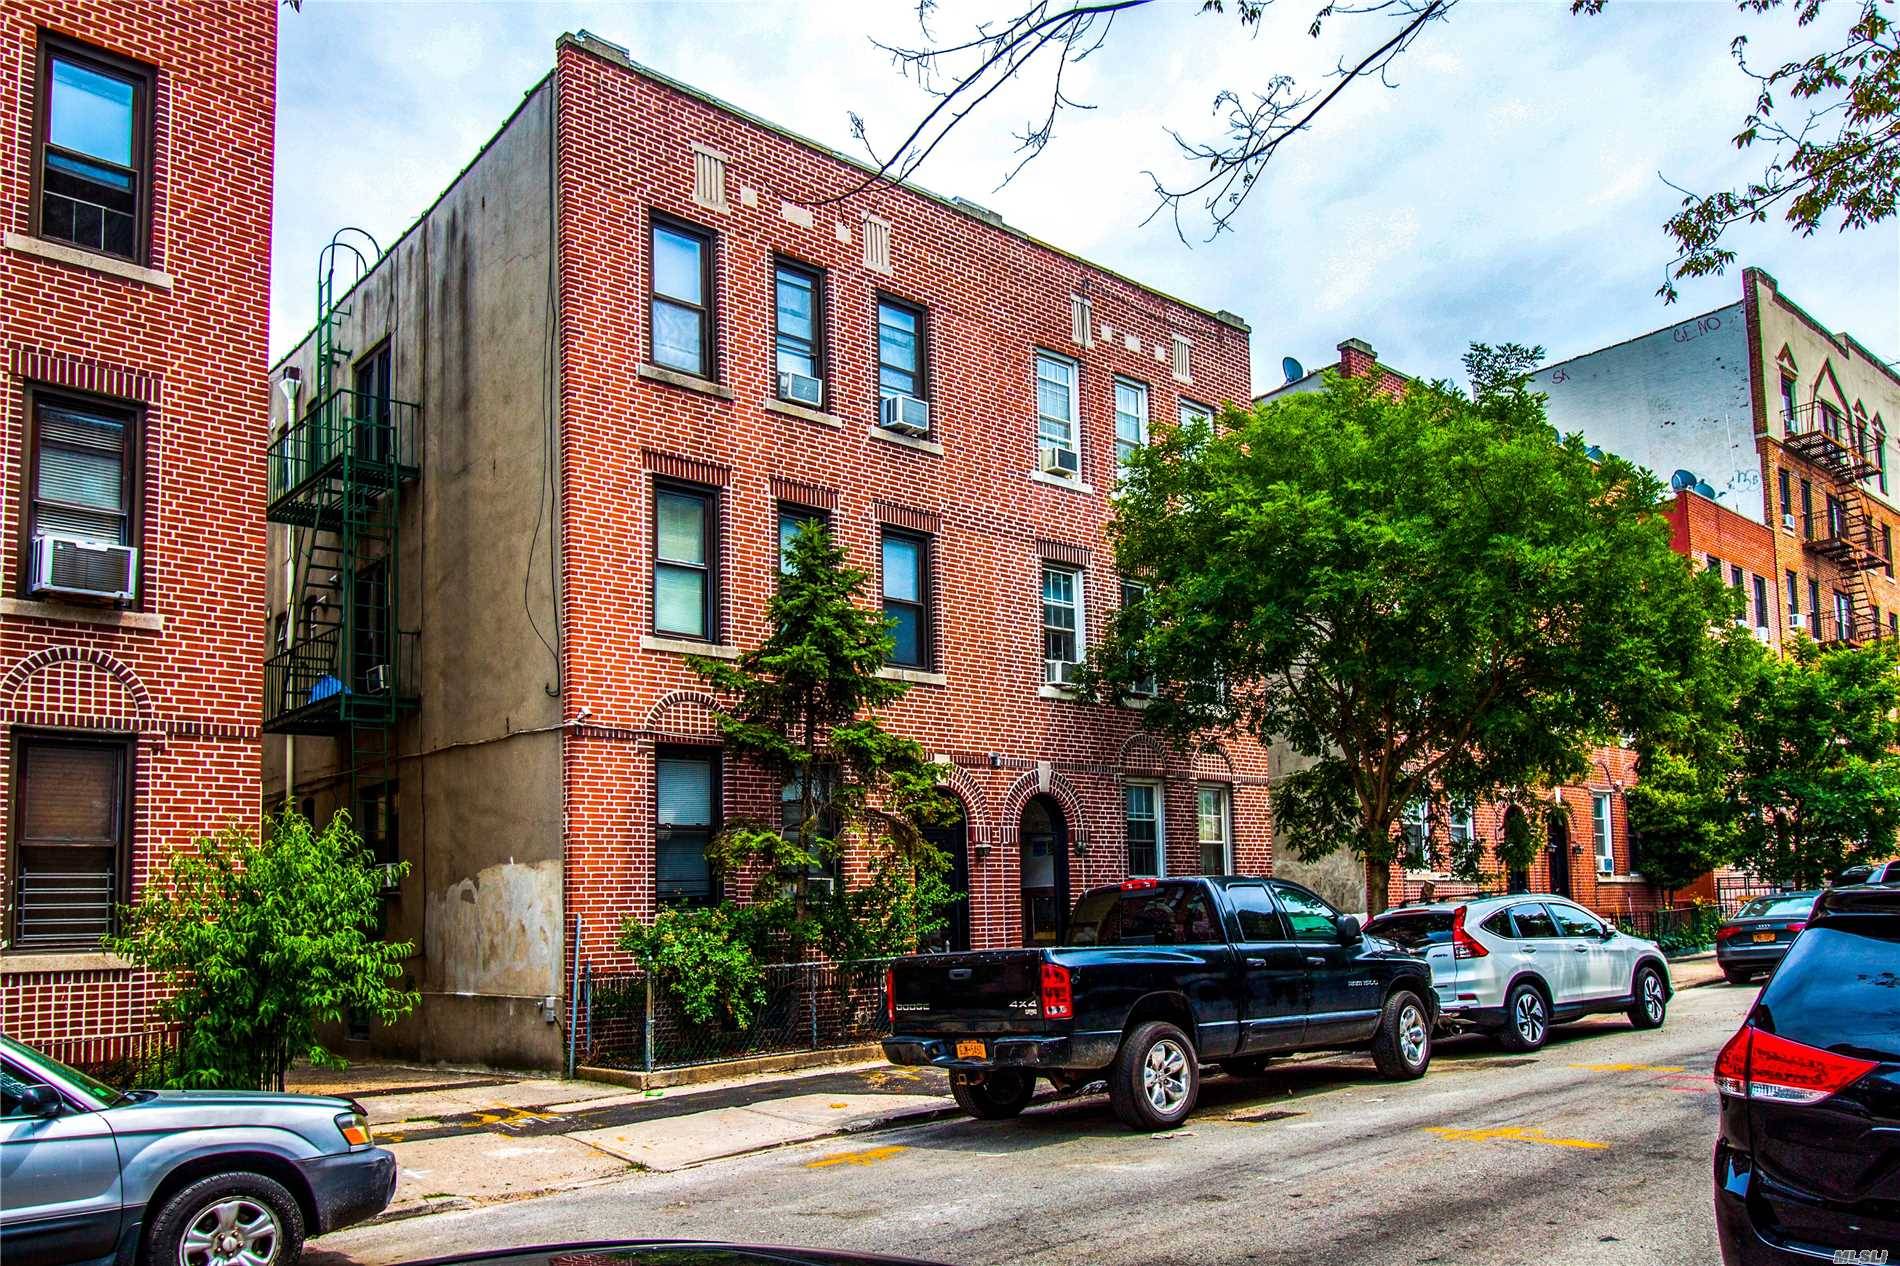 Rare Free Market Rent Legal 6 Family Brick Building In Prime Woodside, No Units Are Under Rent Stabilization Which Means High Income.